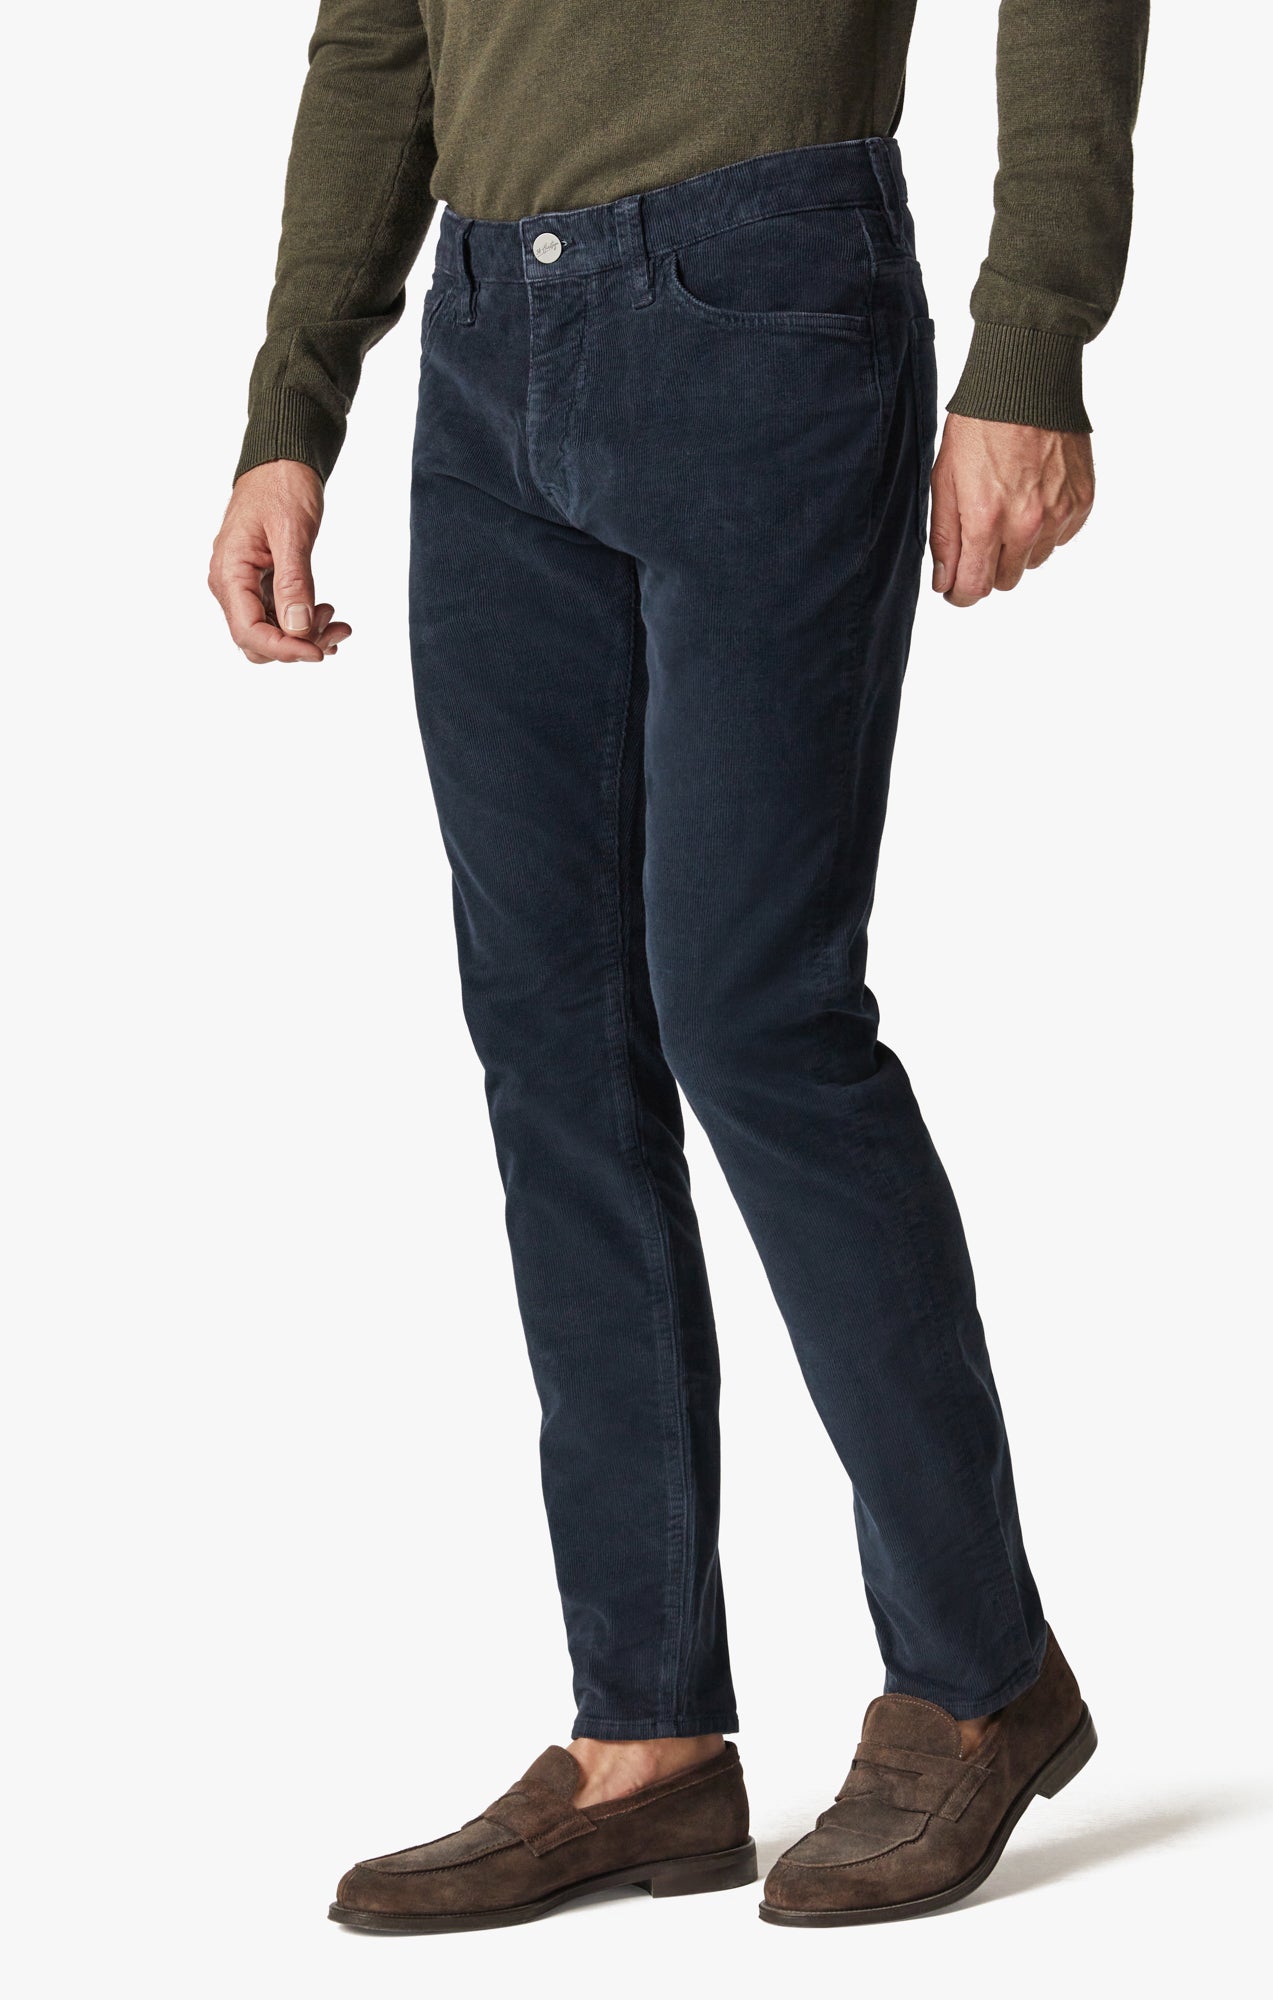 Cool Tapered Leg Pants In Navy Cord Image 3